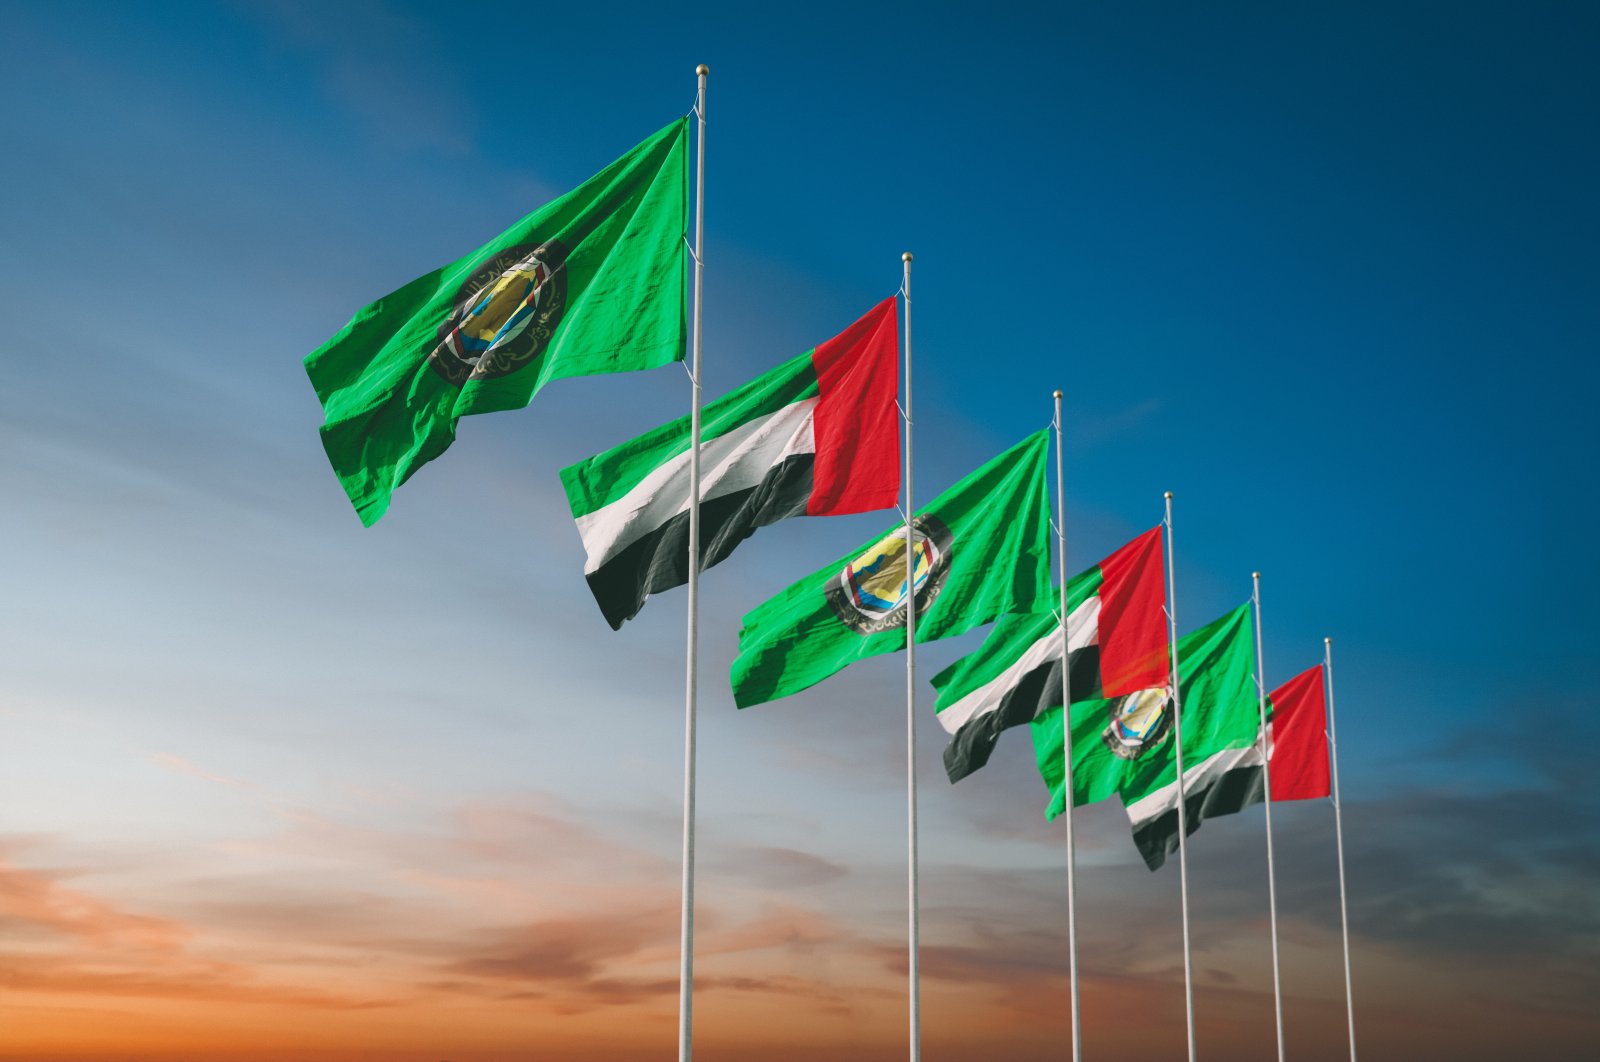 Gulf Cooperation Council (GCC) states’ early diplomatic maneuvering occurred in the broader context of the nations’ strategic interests and should not be confused with unequivocal support for Russia. (Shutterstock Photo)